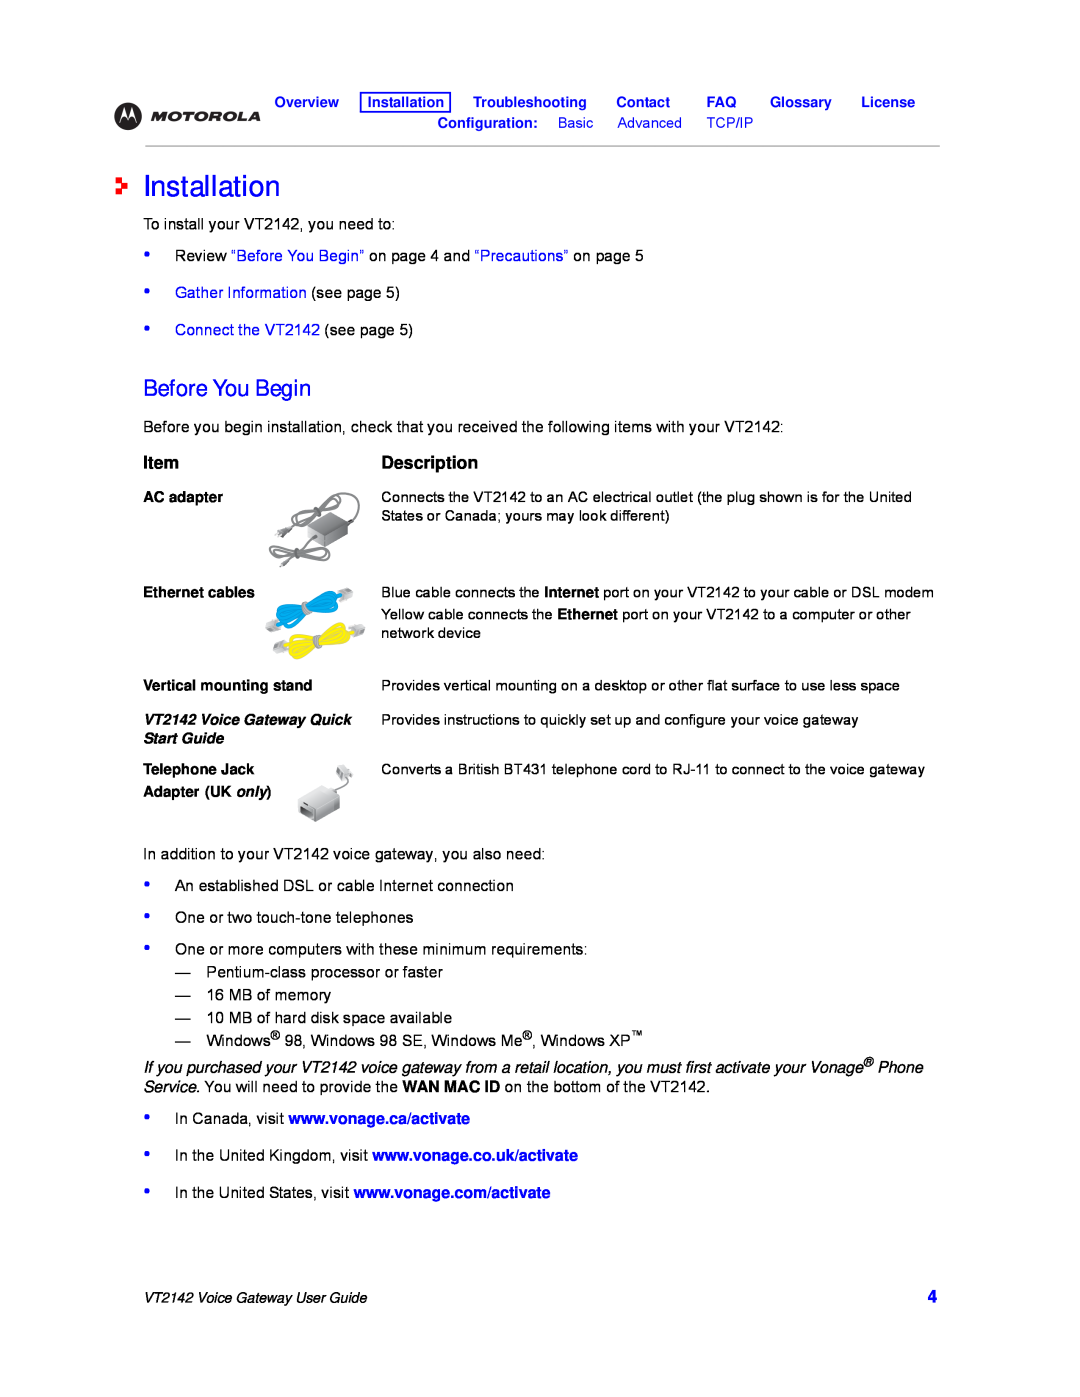 Motorola VT2142 Installation, Description, Review “Before You Begin” on page 4 and “Precautions” on page, Start Guide 